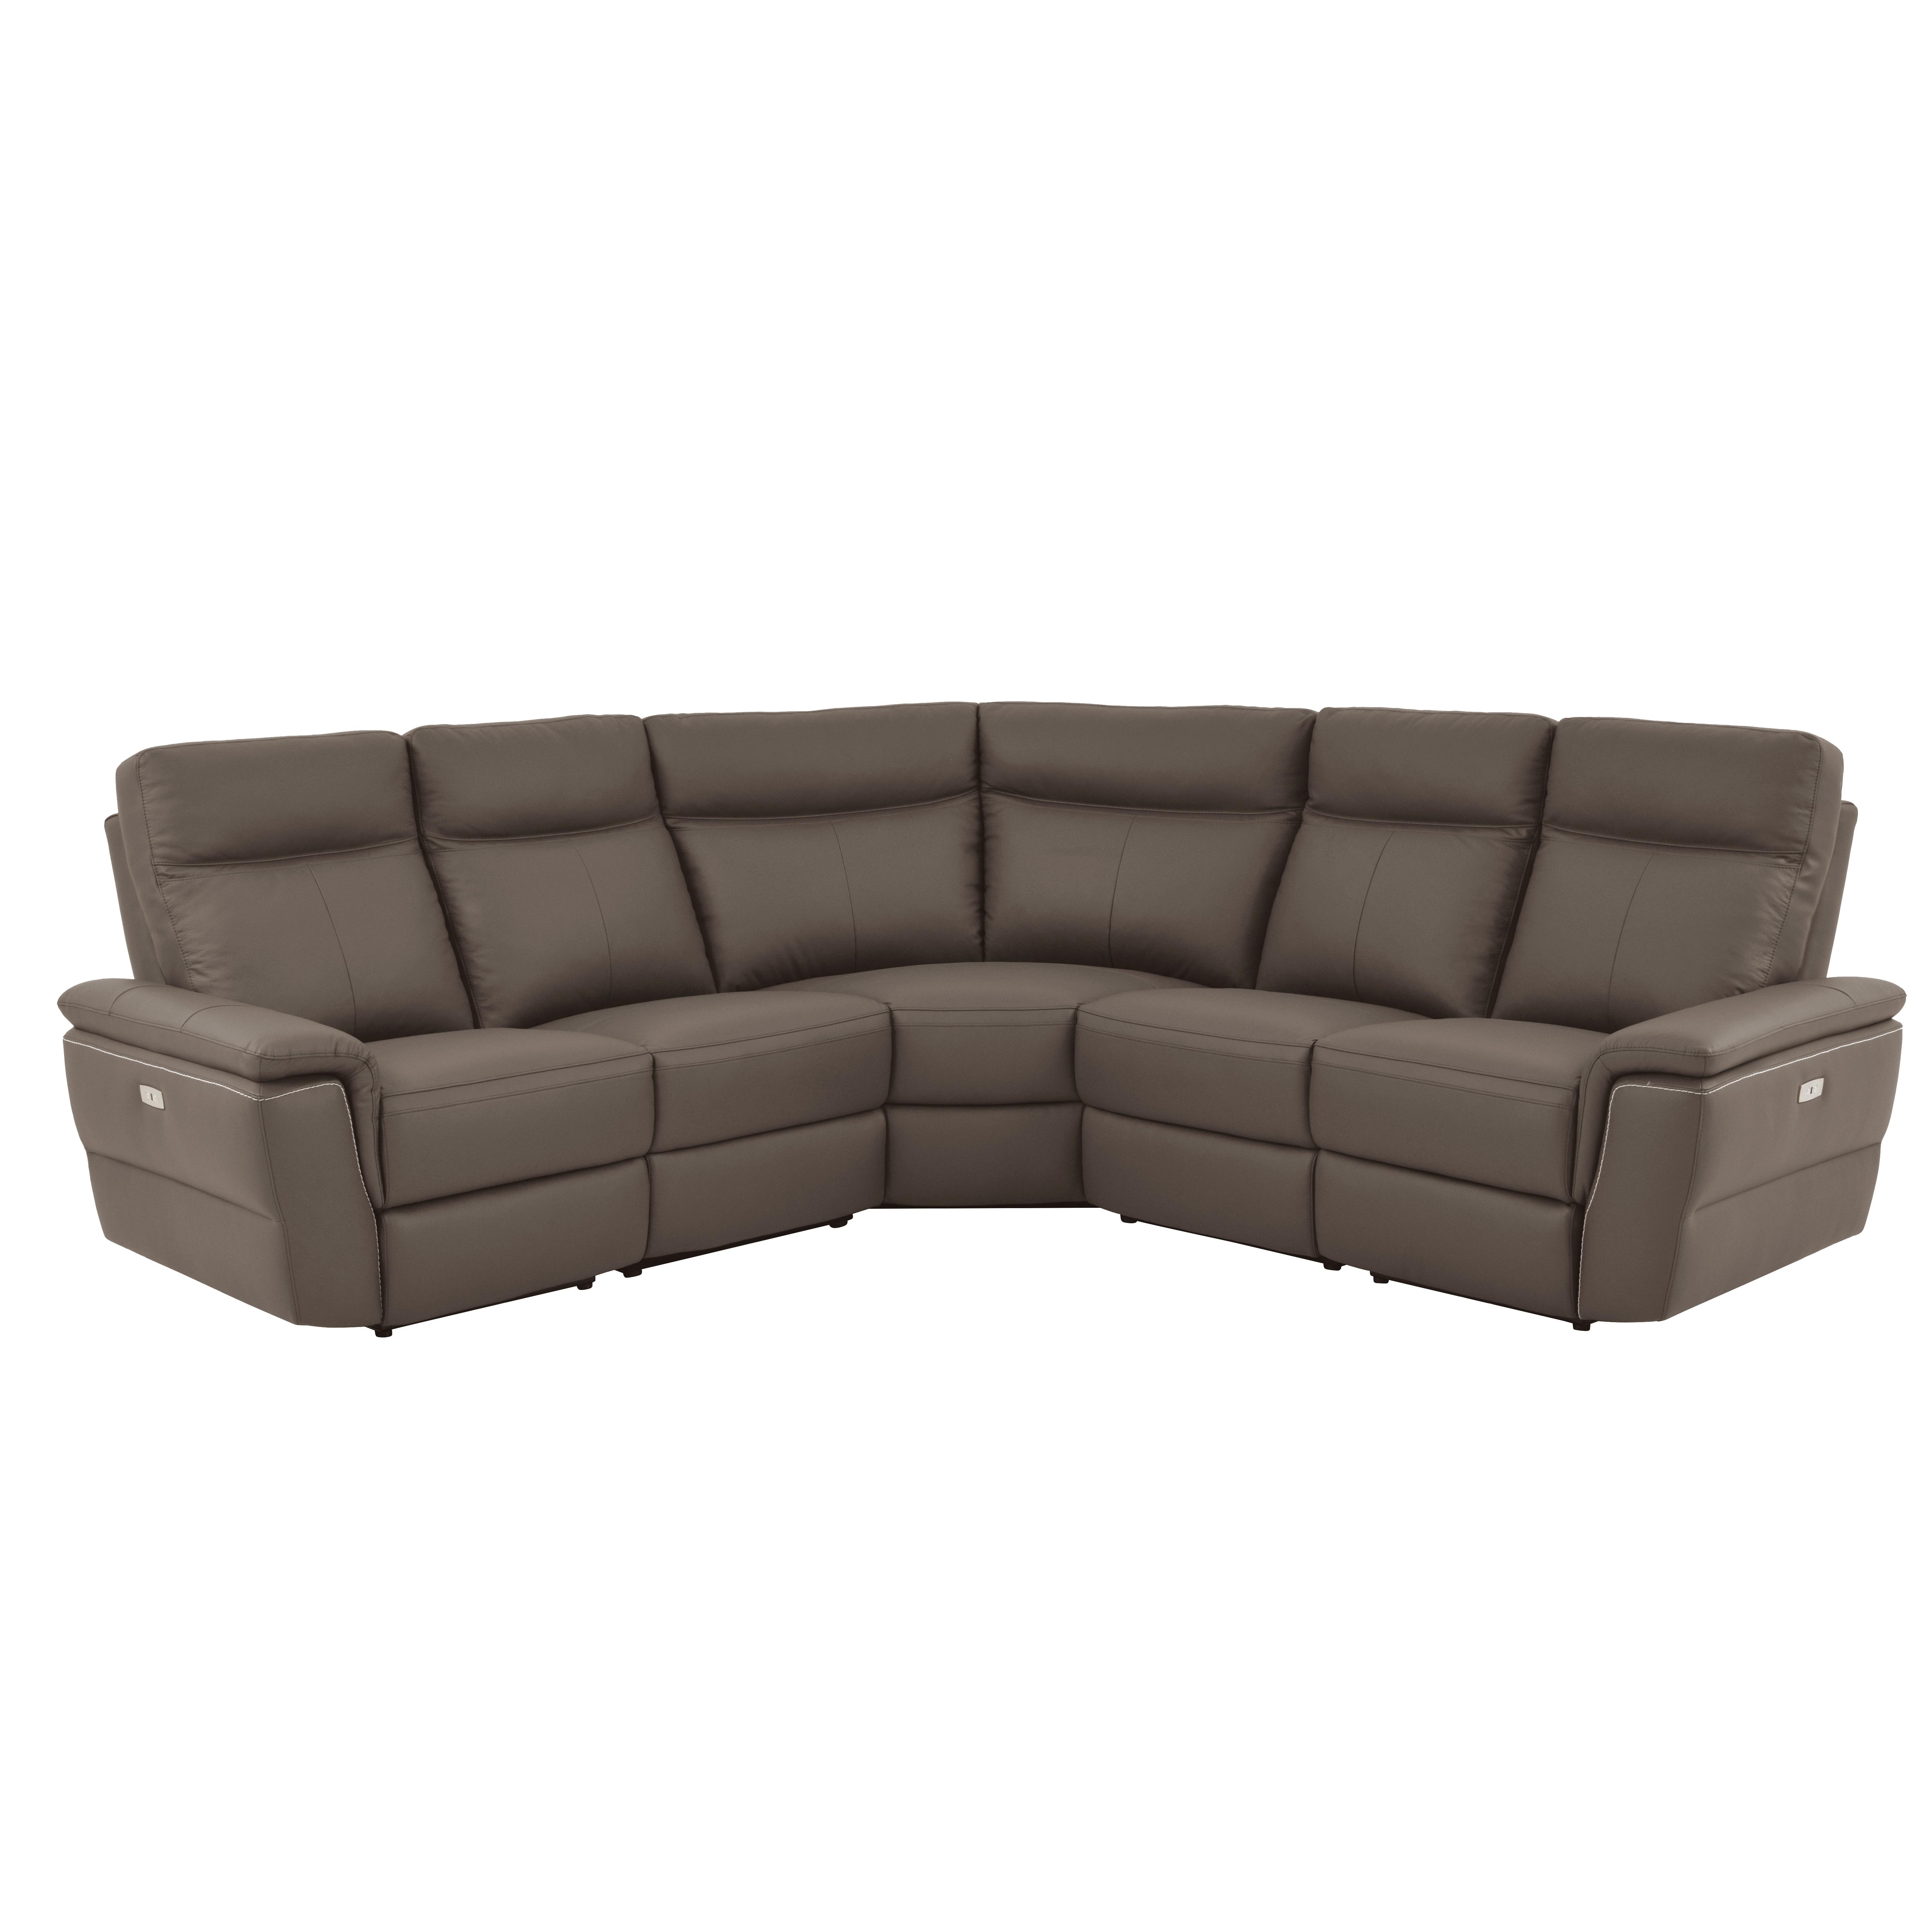 

    
Contemporary Raisin Leather 5-Piece Power Reclining Sectional Homelegance 8308*5C1PW Olympia
